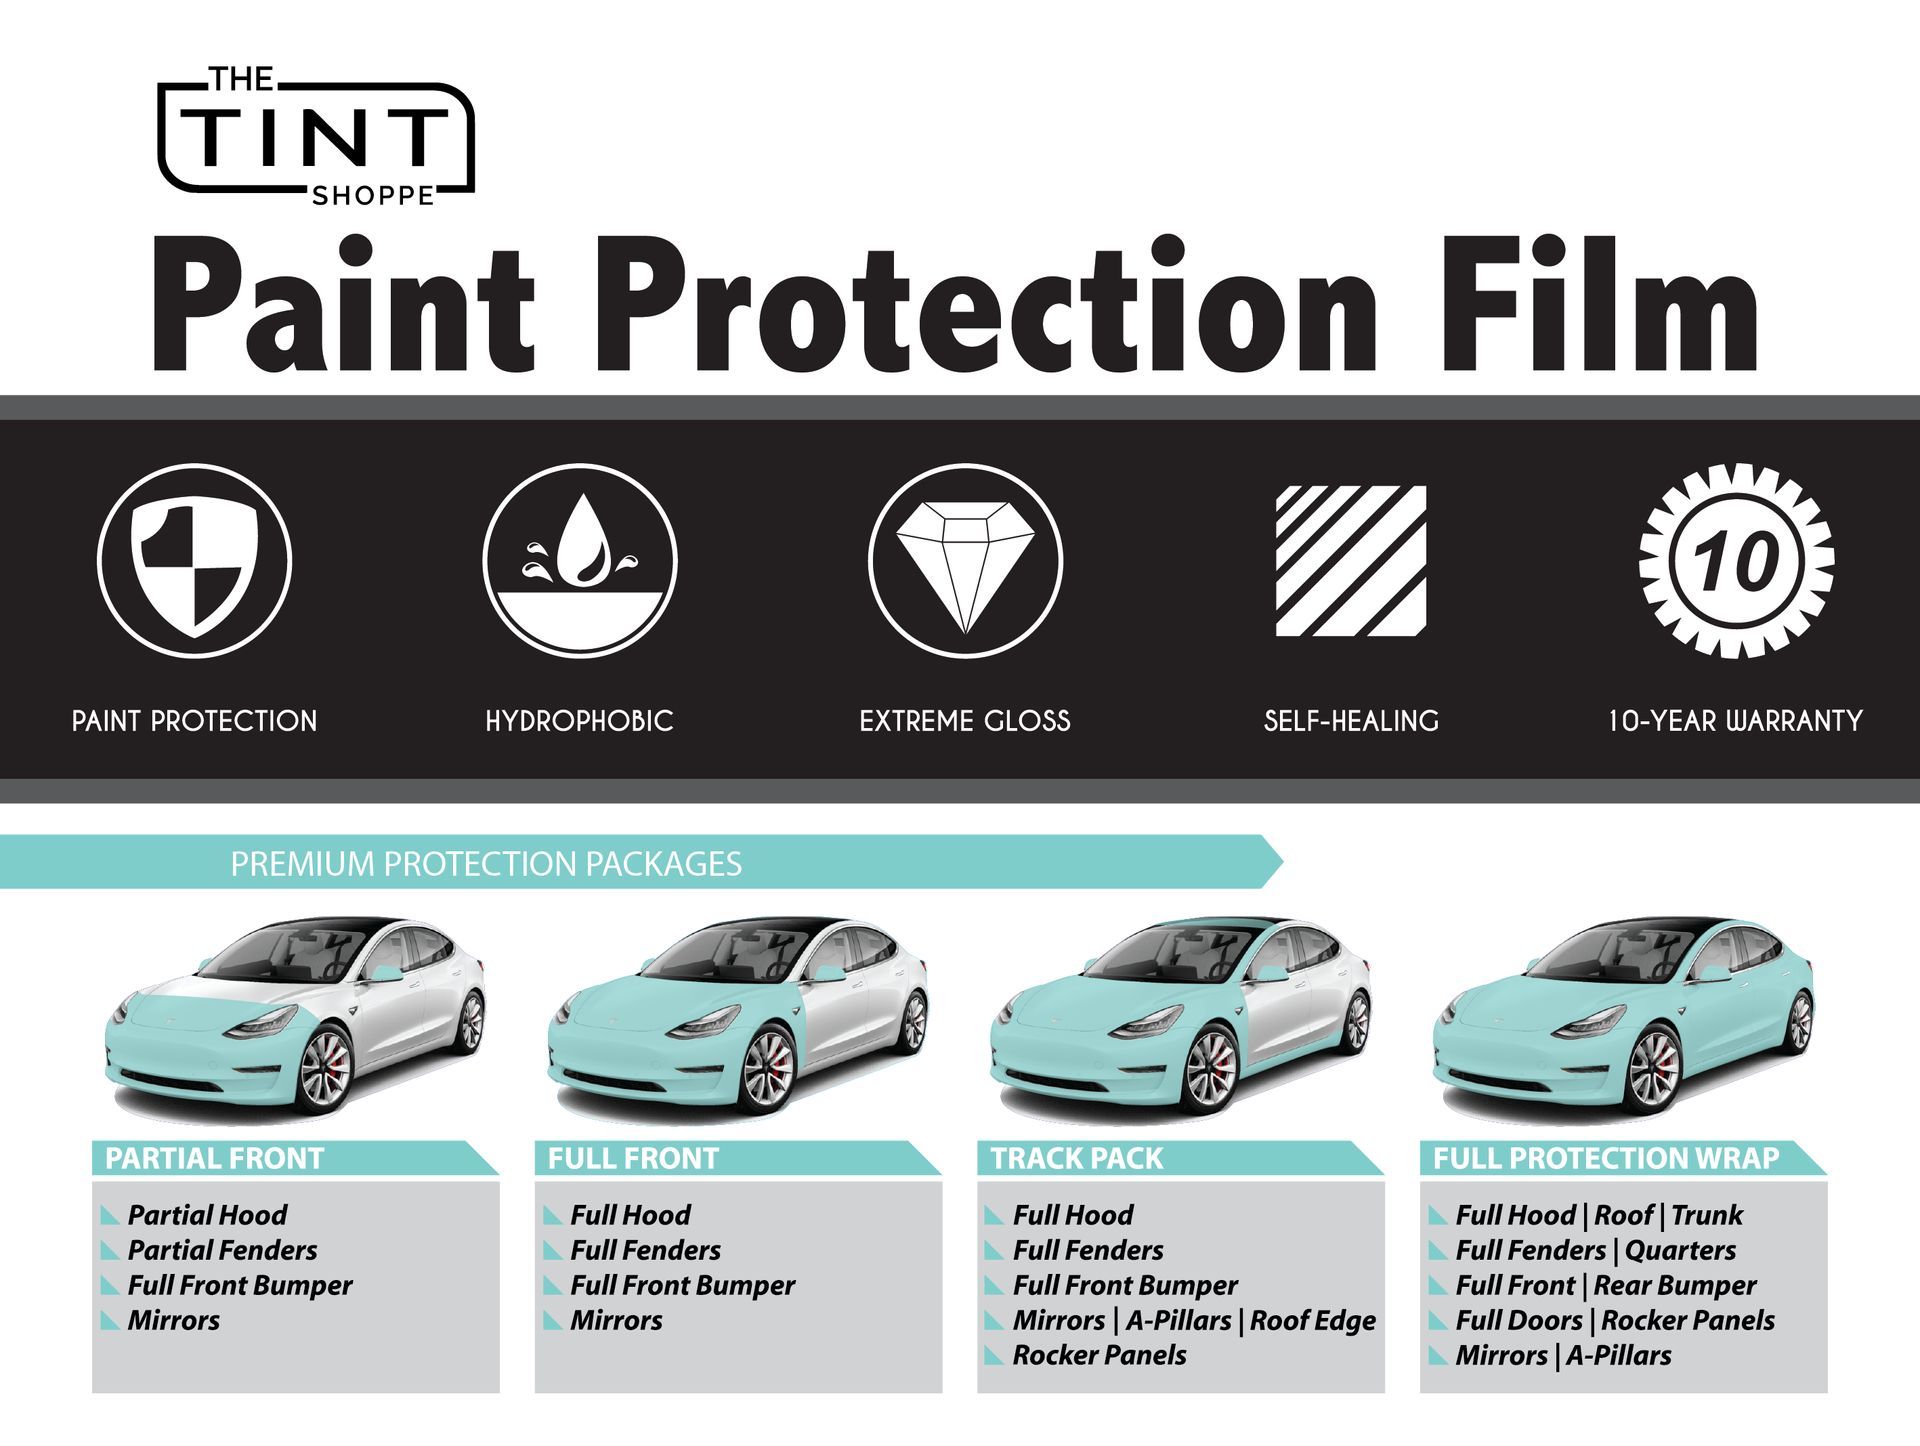 Paint Protection Film Packages by The Tint Shoppe